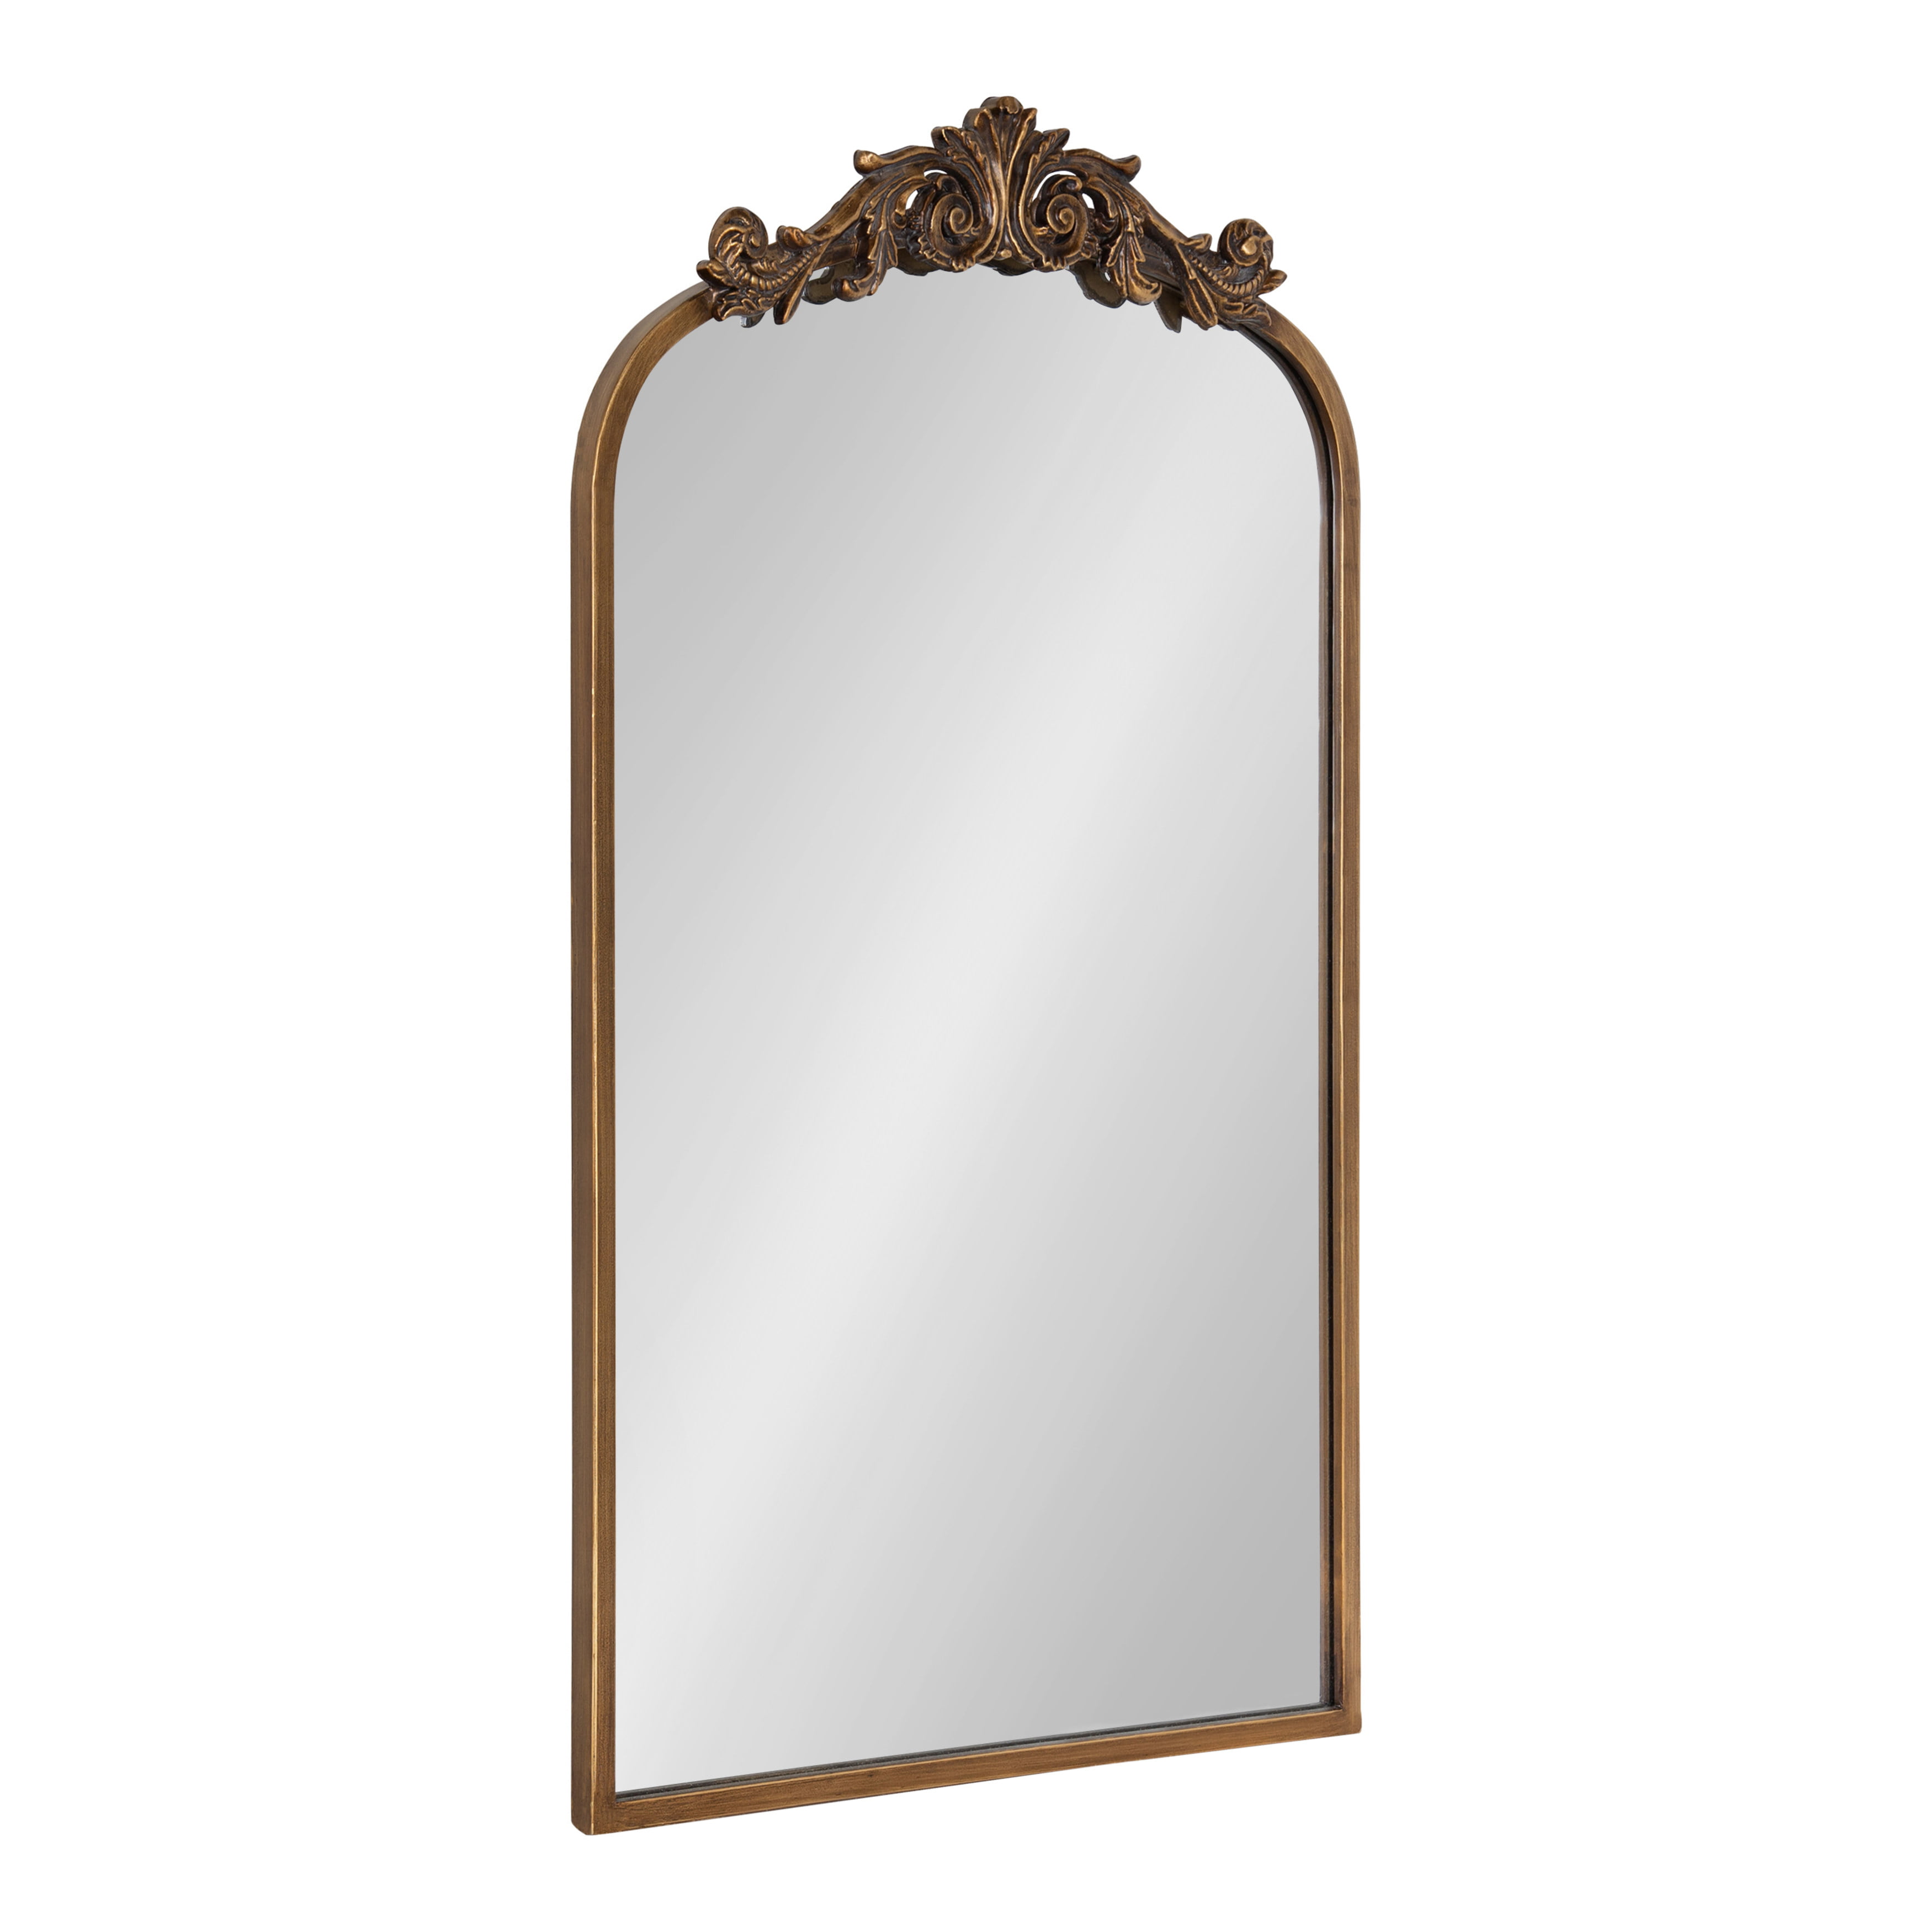 Shop Kate and Laurel Arendahl Traditional Arch Mirror, 19" x 30.75" , Gold, Baroque Inspired Wall Decor from Walmart on Openhaus